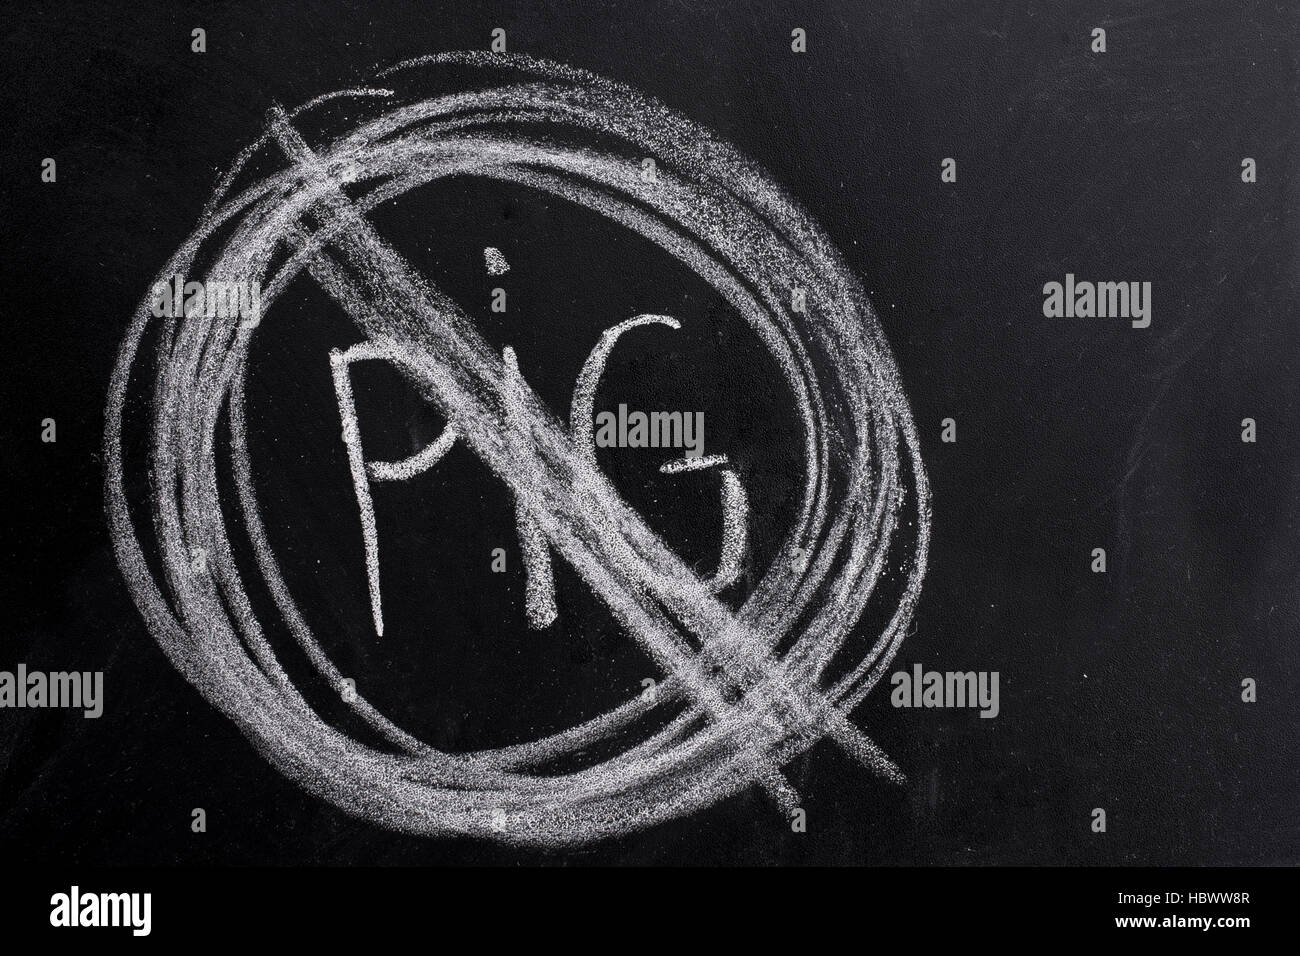 No pig sign drawn on the blackboard with chalk Stock Photo